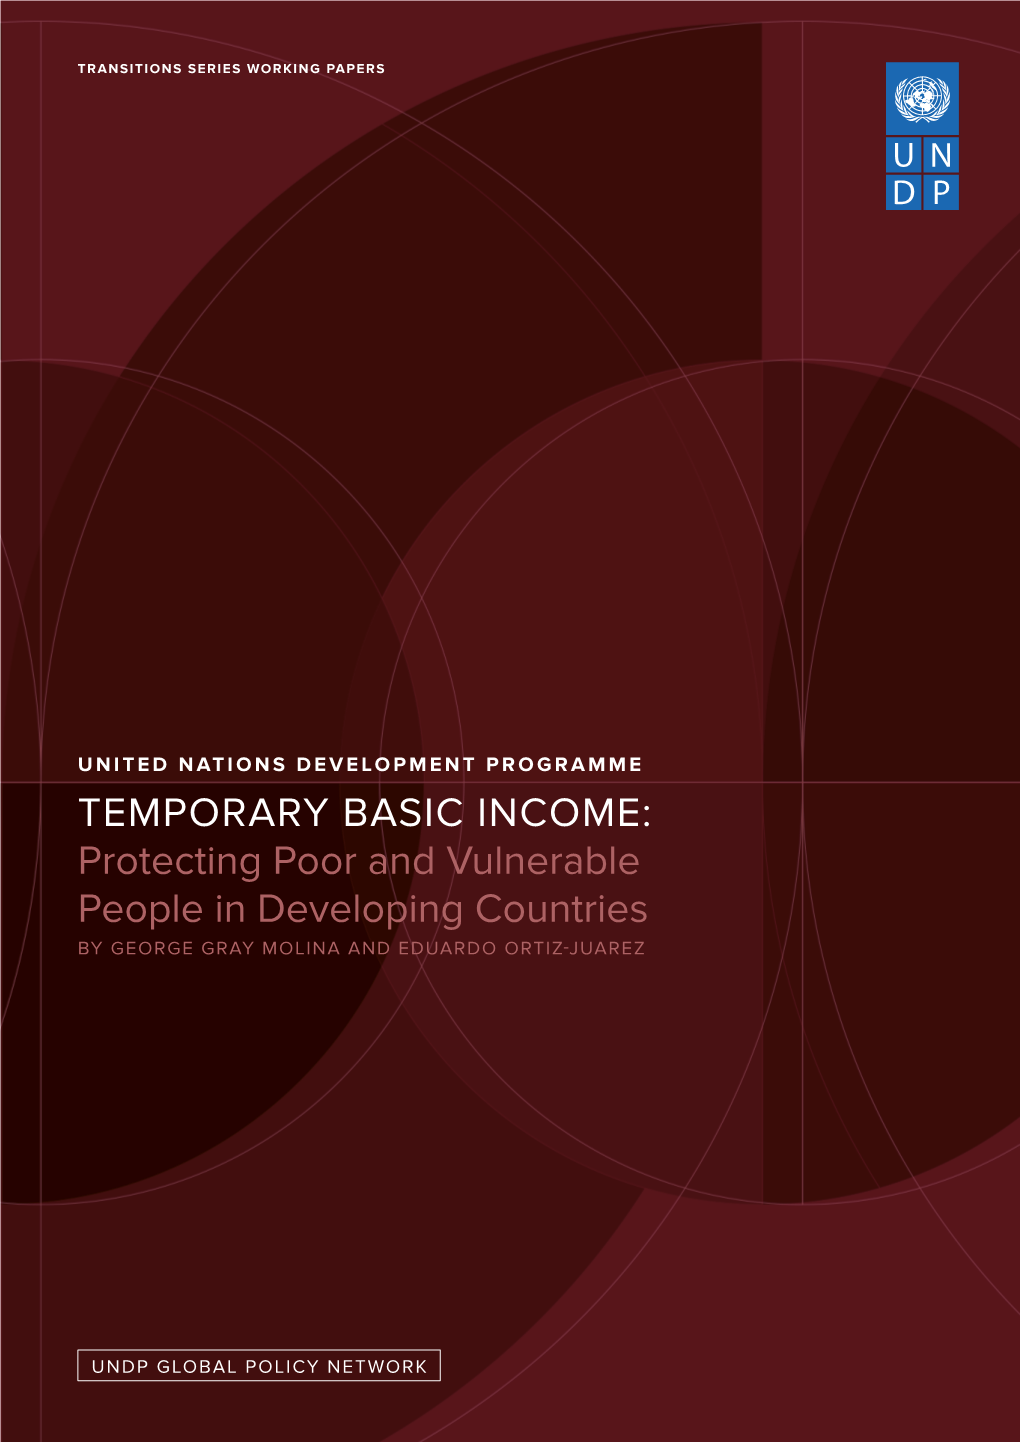 TEMPORARY BASIC INCOME: Protecting Poor and Vulnerable People in Developing Countries by GEORGE GRAY MOLINA and EDUARDO ORTIZ-JUAREZ